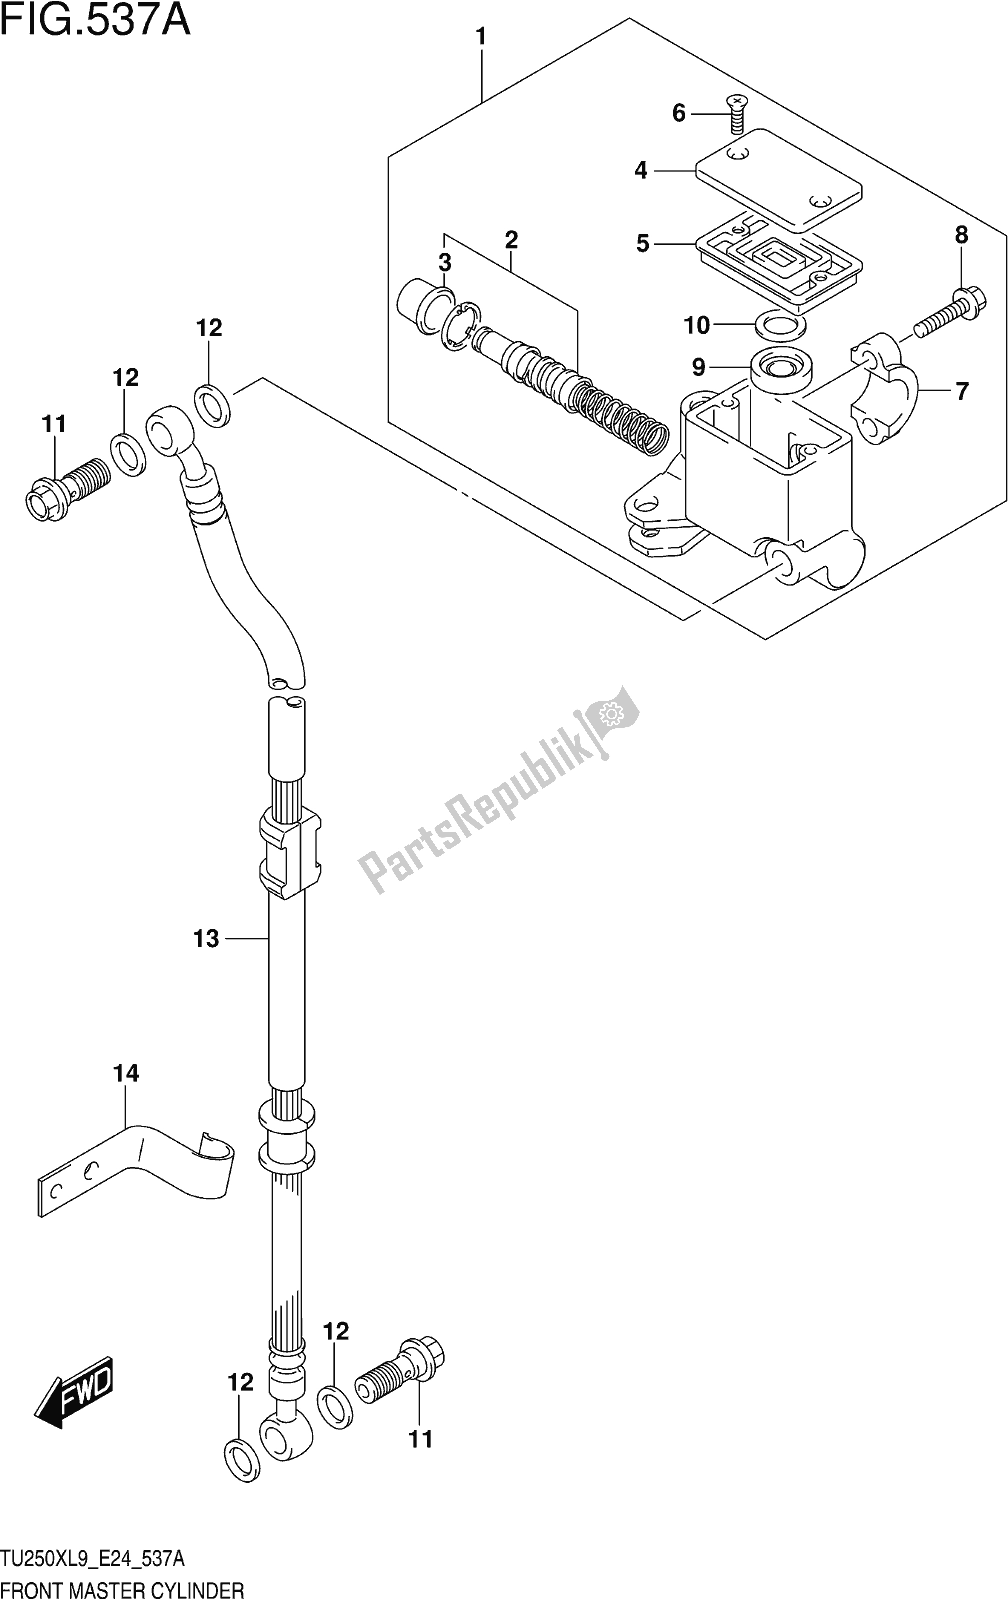 All parts for the Fig. 537a Front Master Cylinder of the Suzuki TU 250X 2019